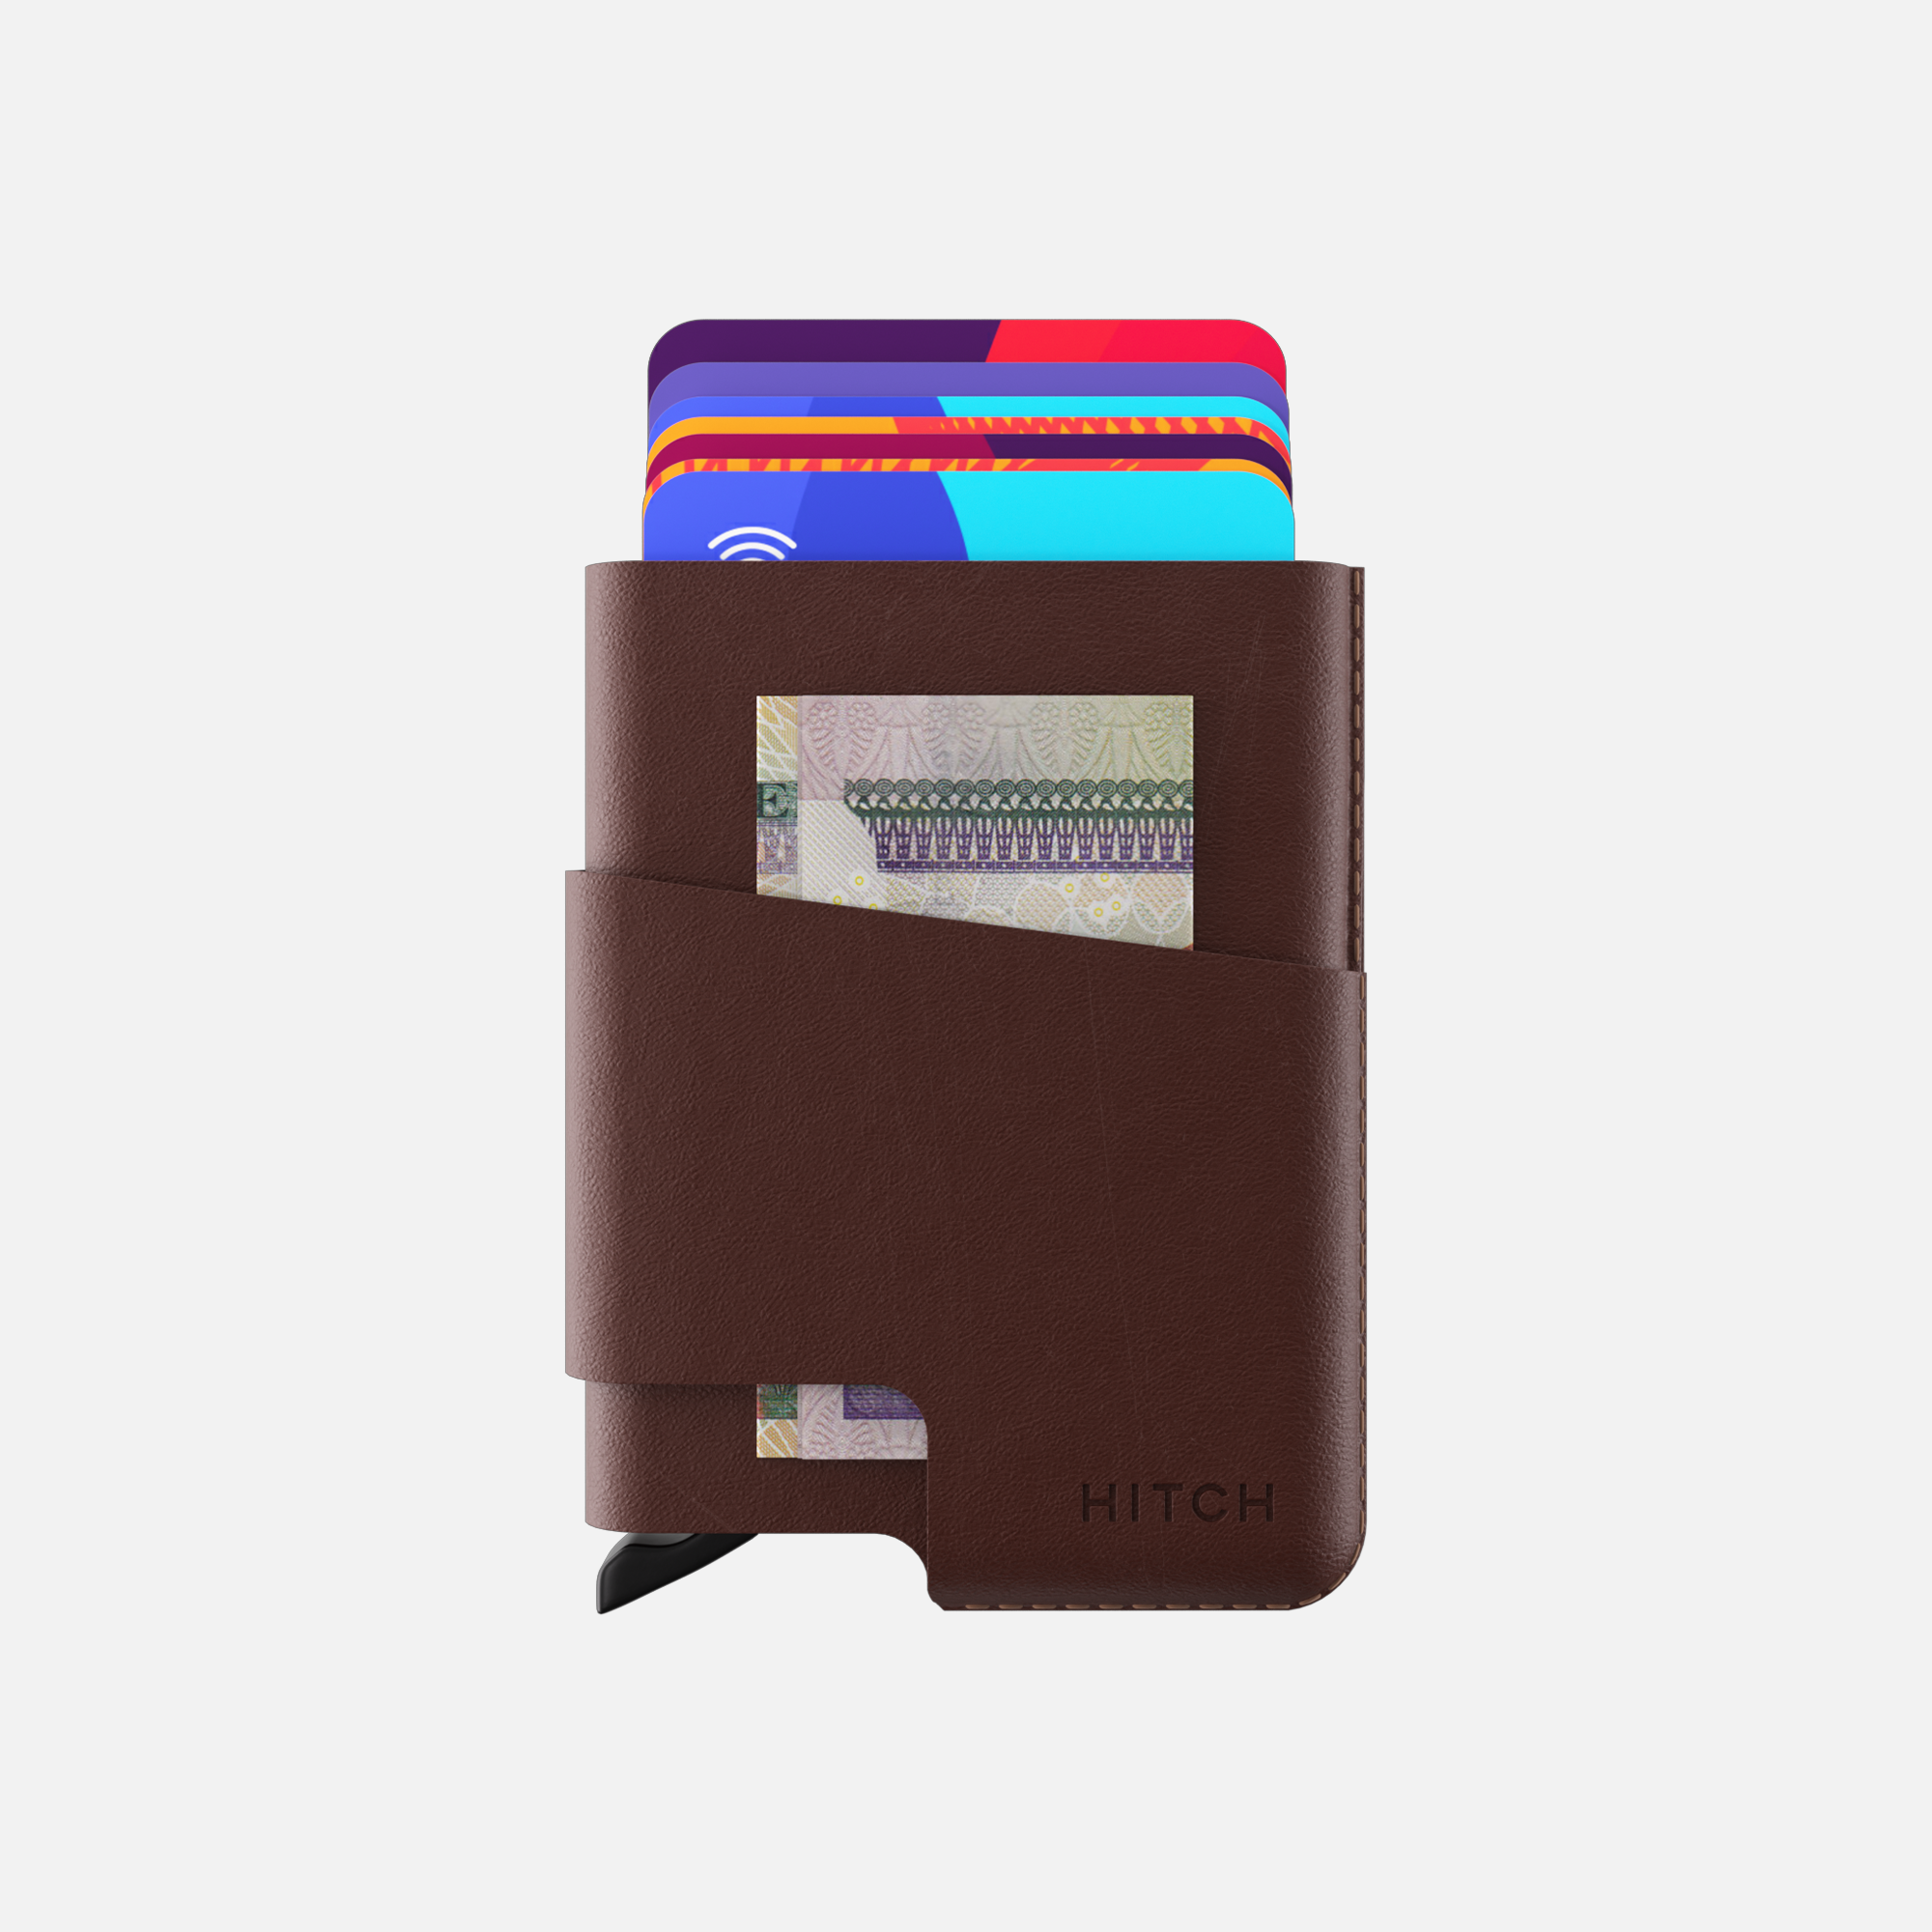 Brown leather wallet holding credit cards and cash banknote.